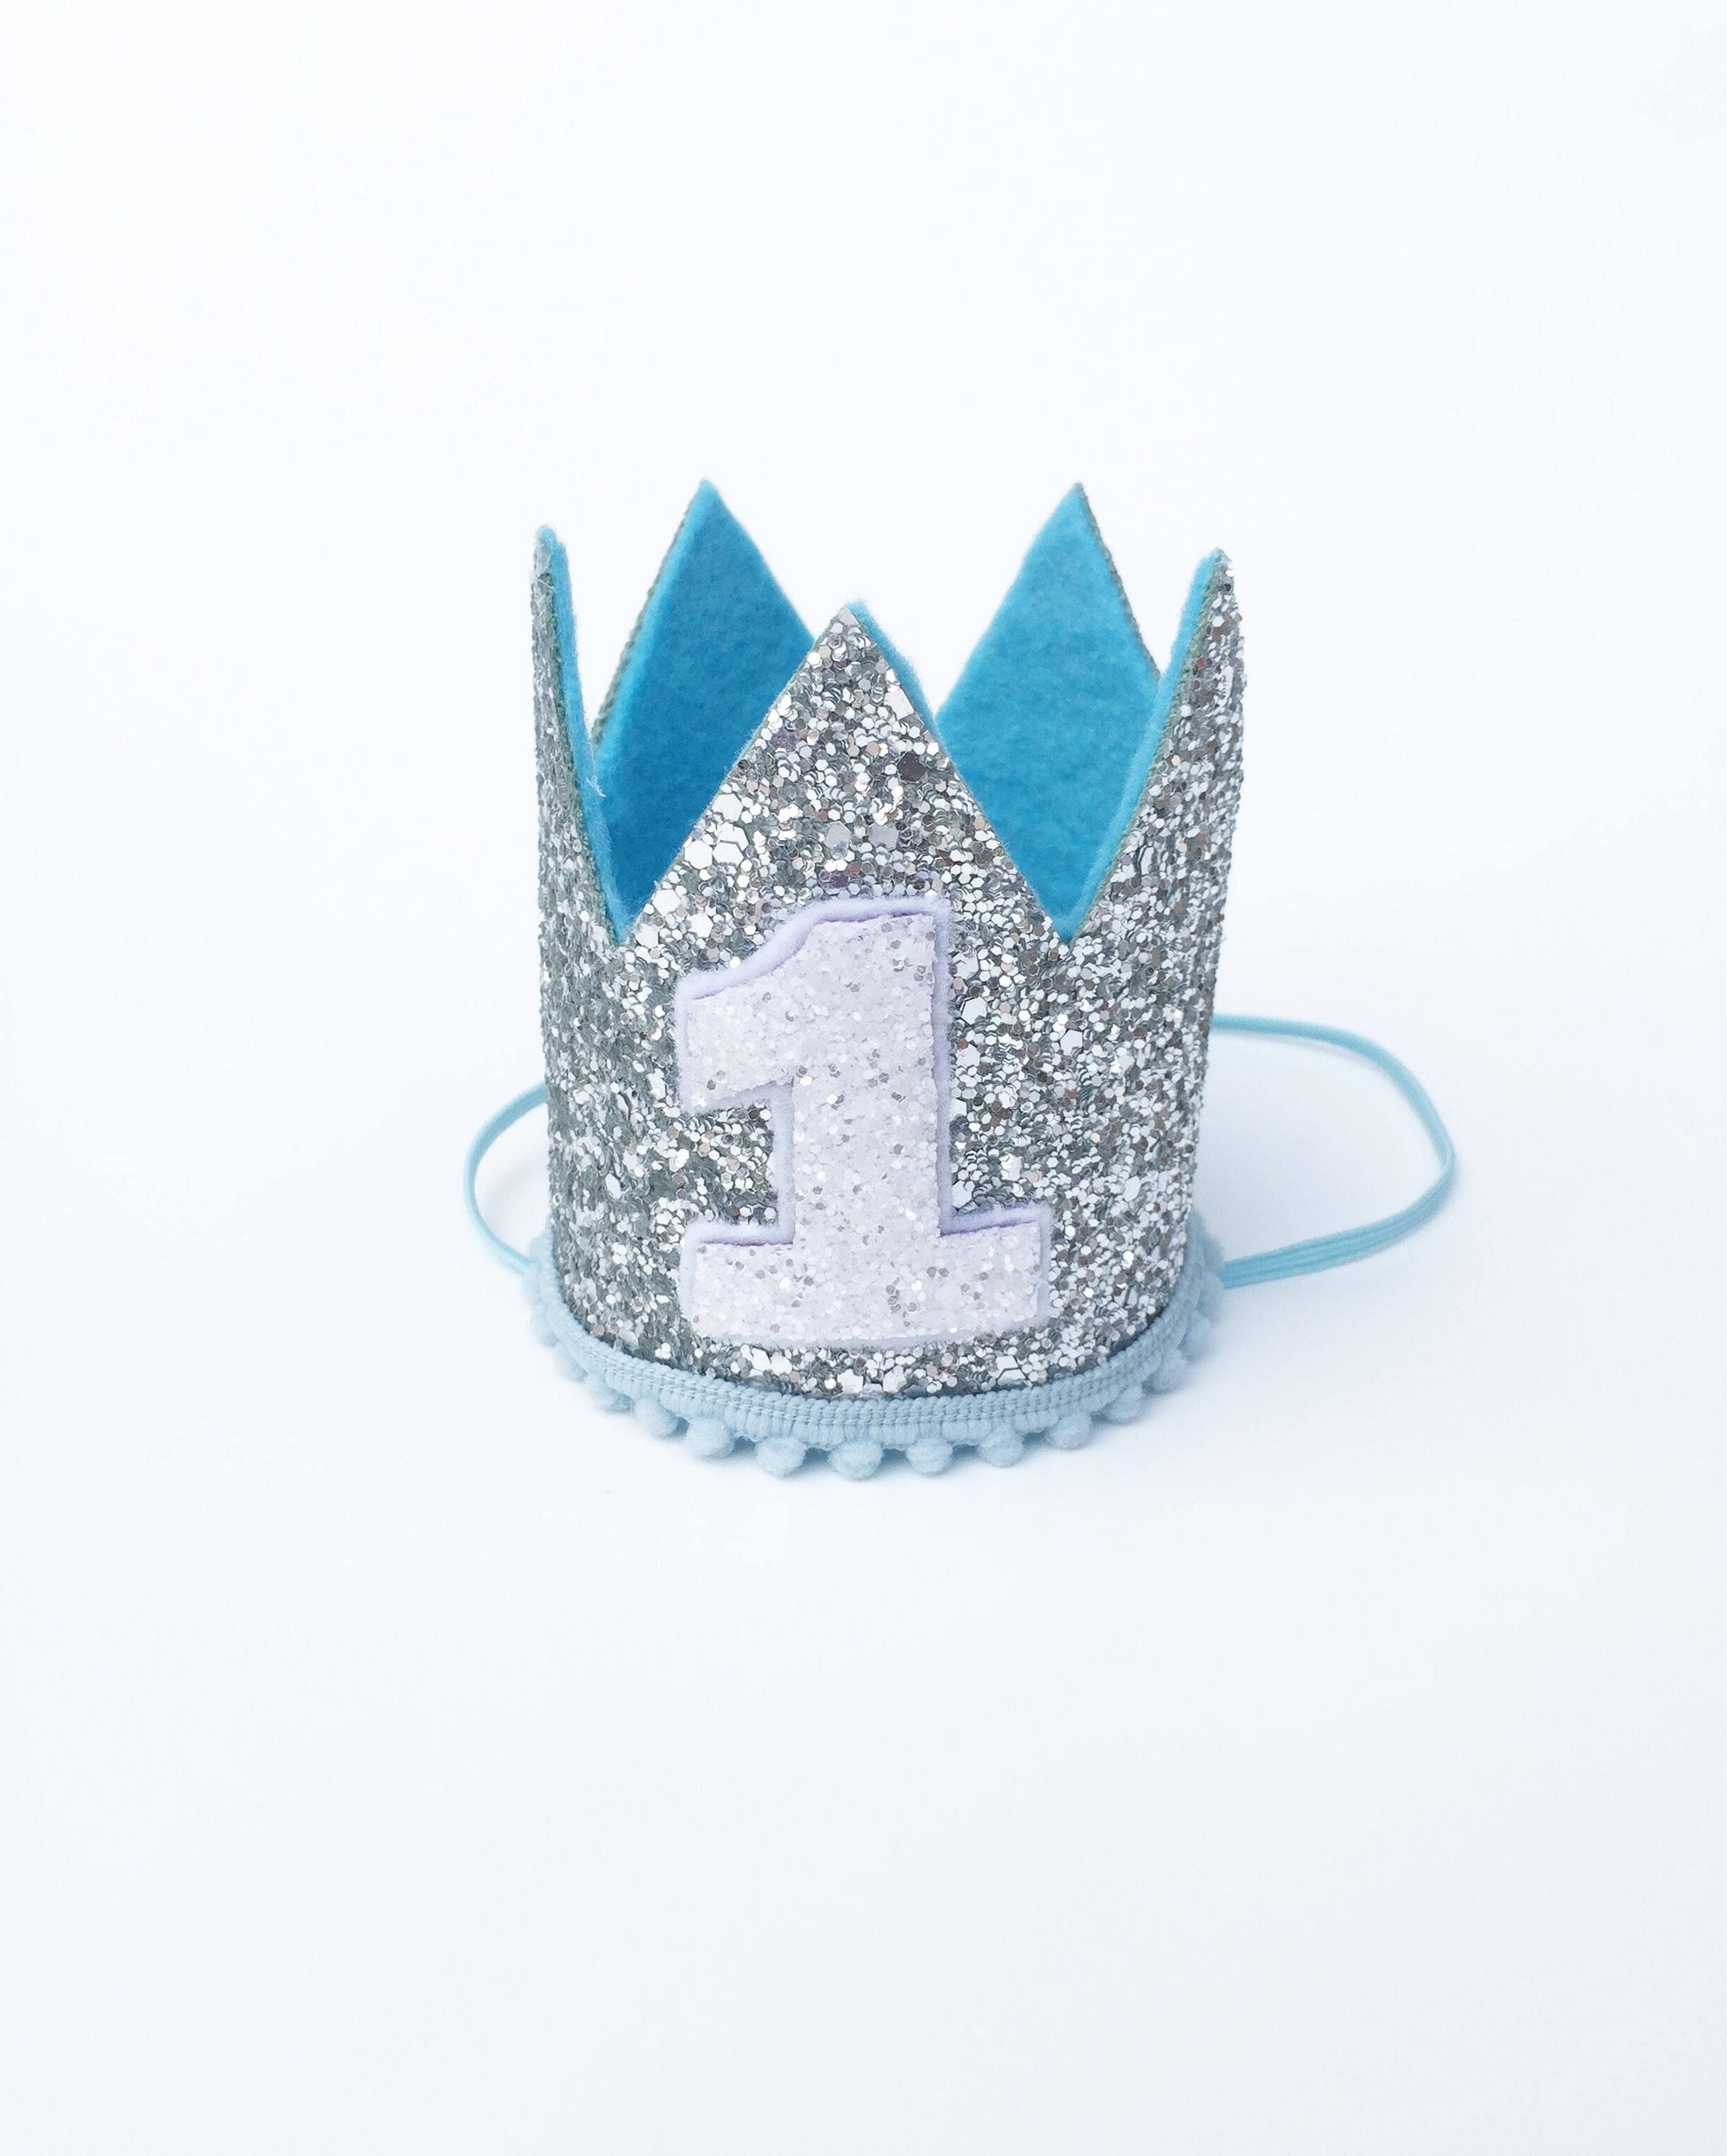 Silver and blue crown